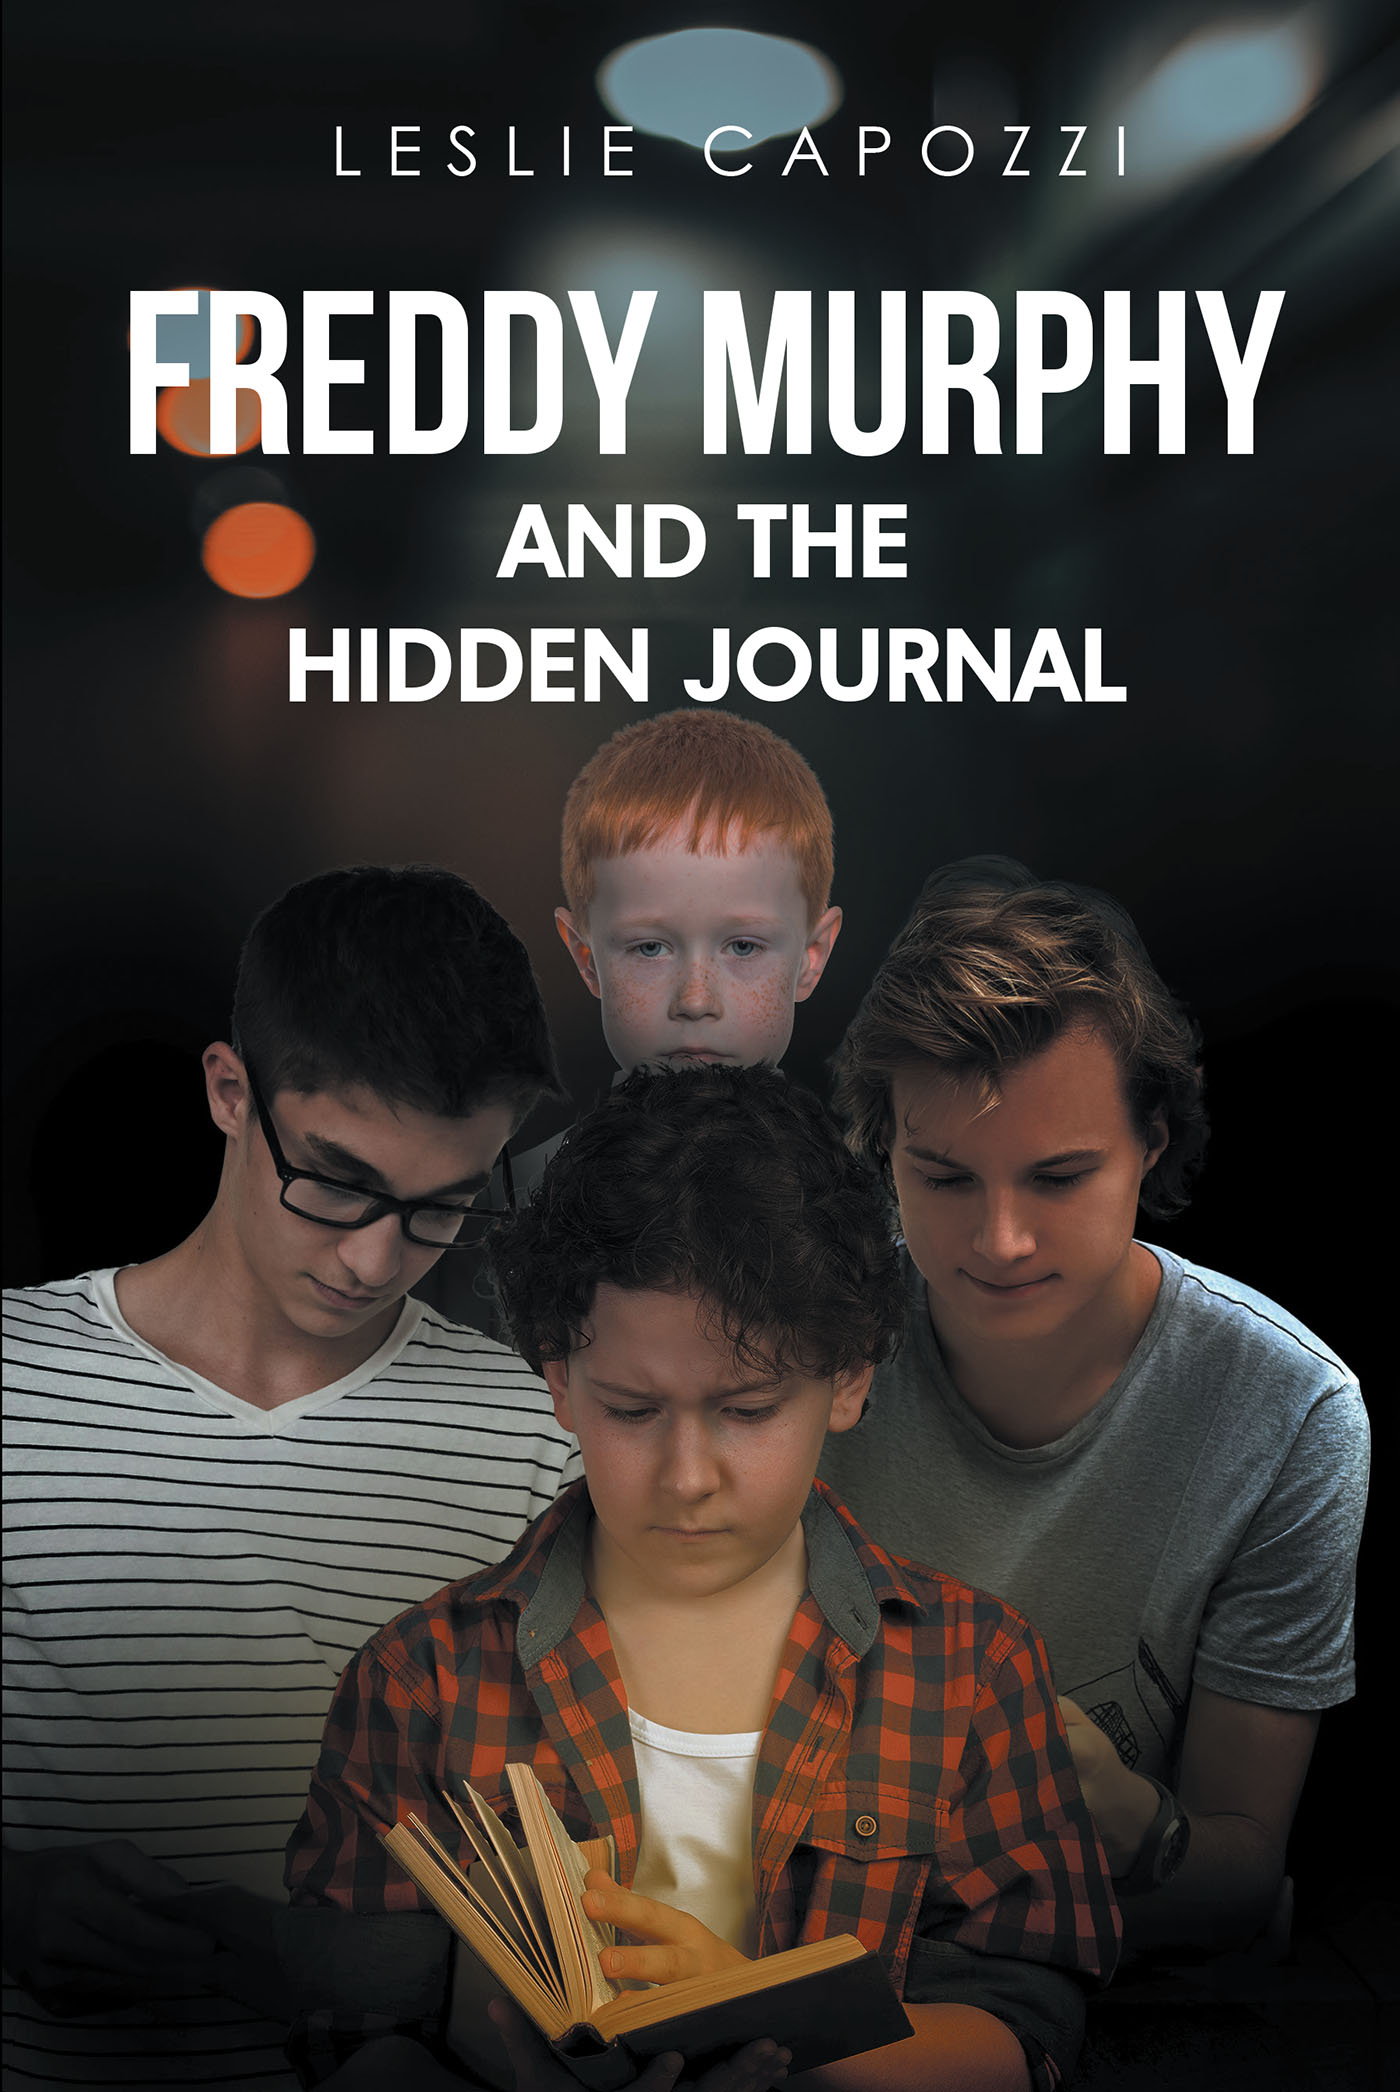 Author Leslie Capozzi’s New Book, "Freddy Murphy and the Hidden Journal," Follows Freddy and His Friends on a Captivating and Unforgettable Adventure